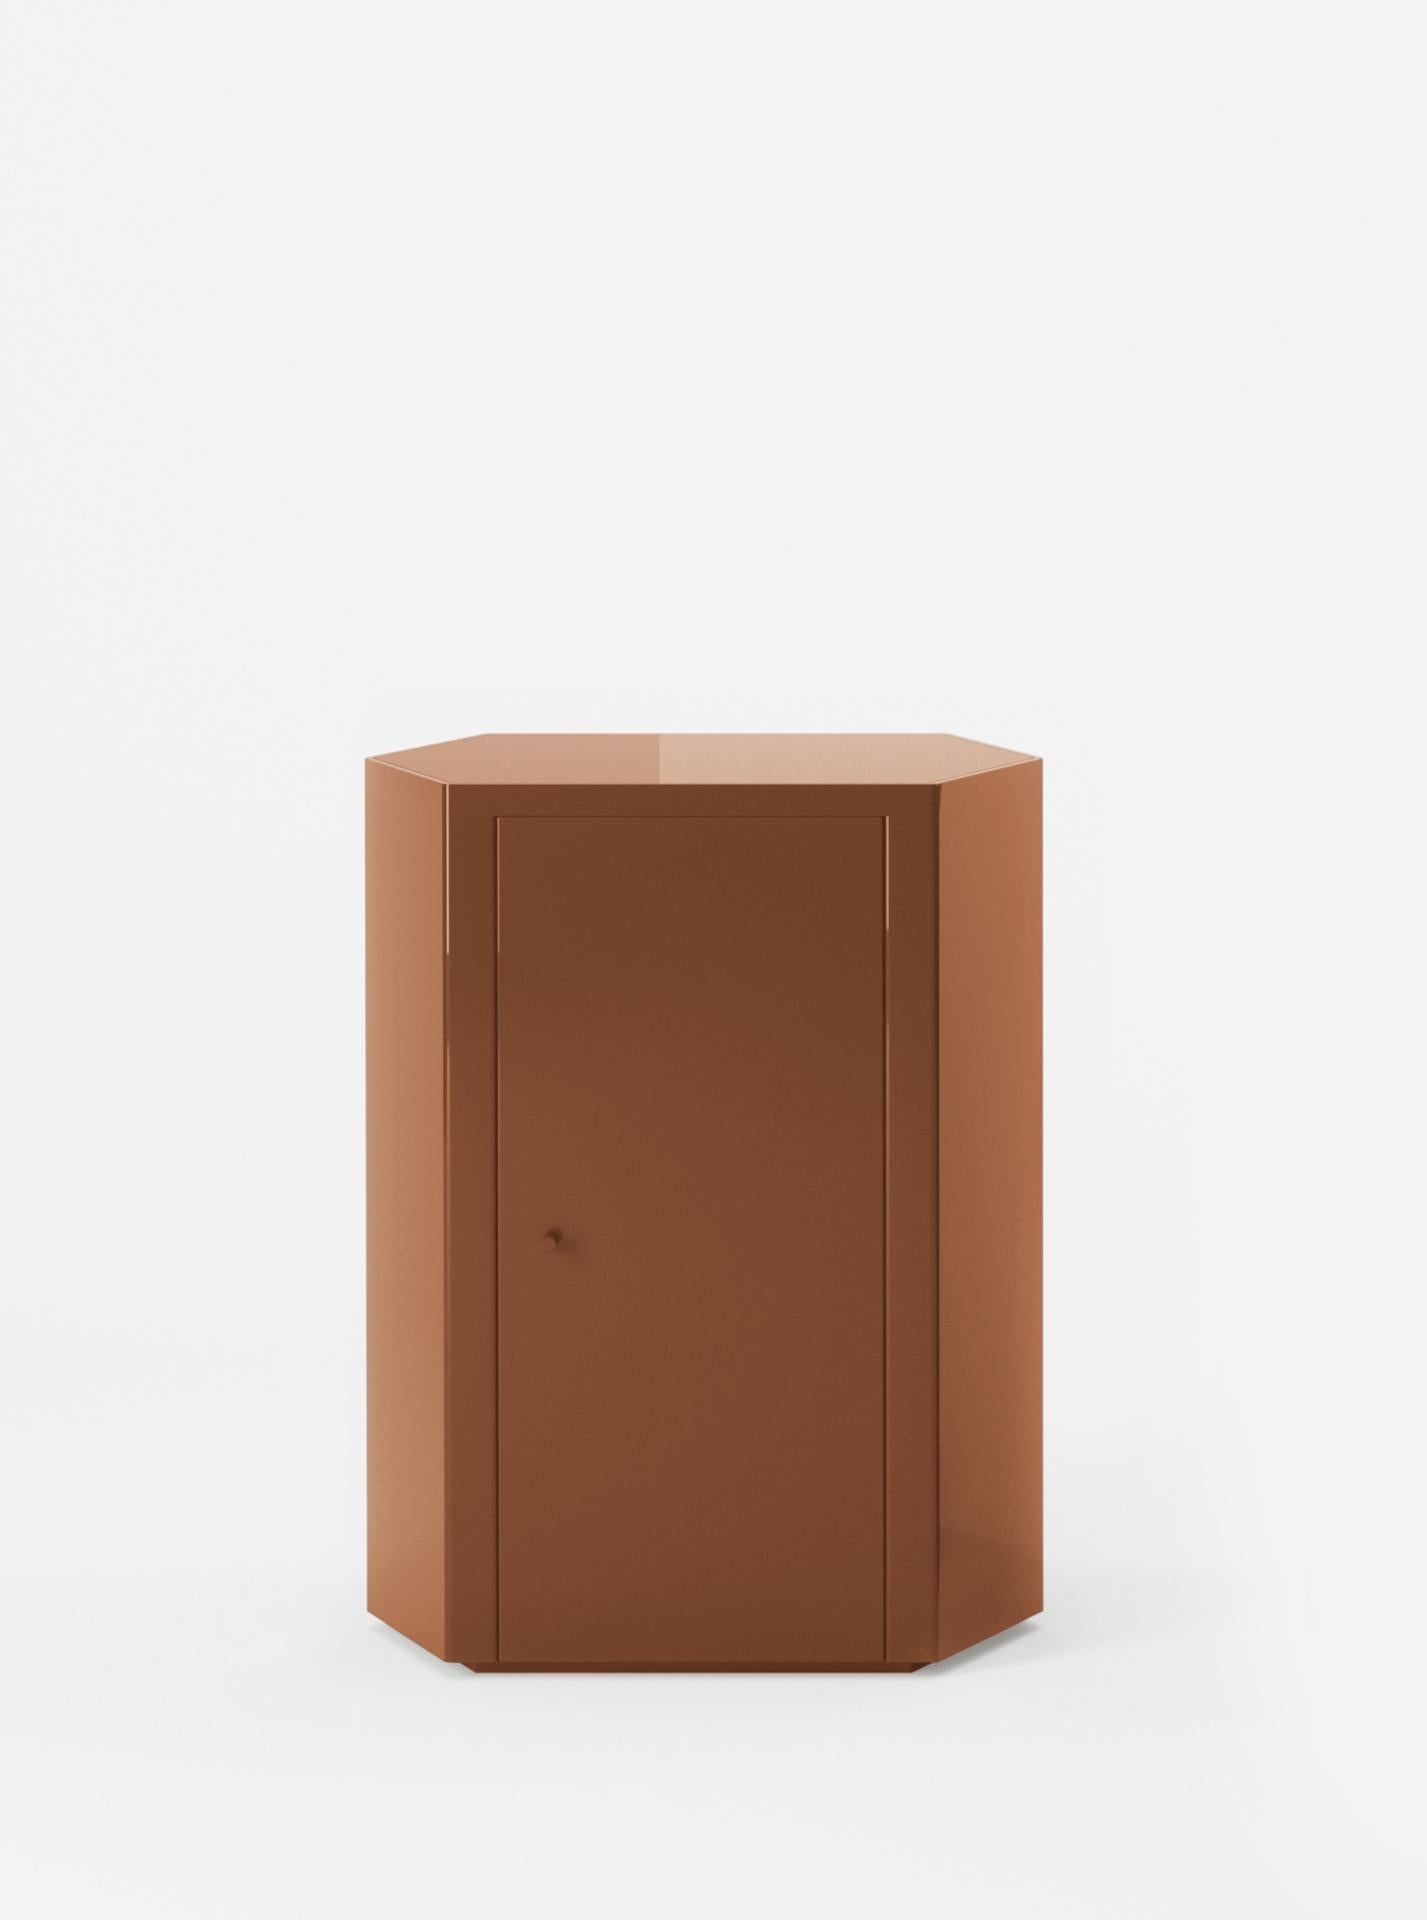 Minimalist Pair of Park Night Stands in Cider Orange Brown Lacquer by Yaniv Chen for Lemon For Sale